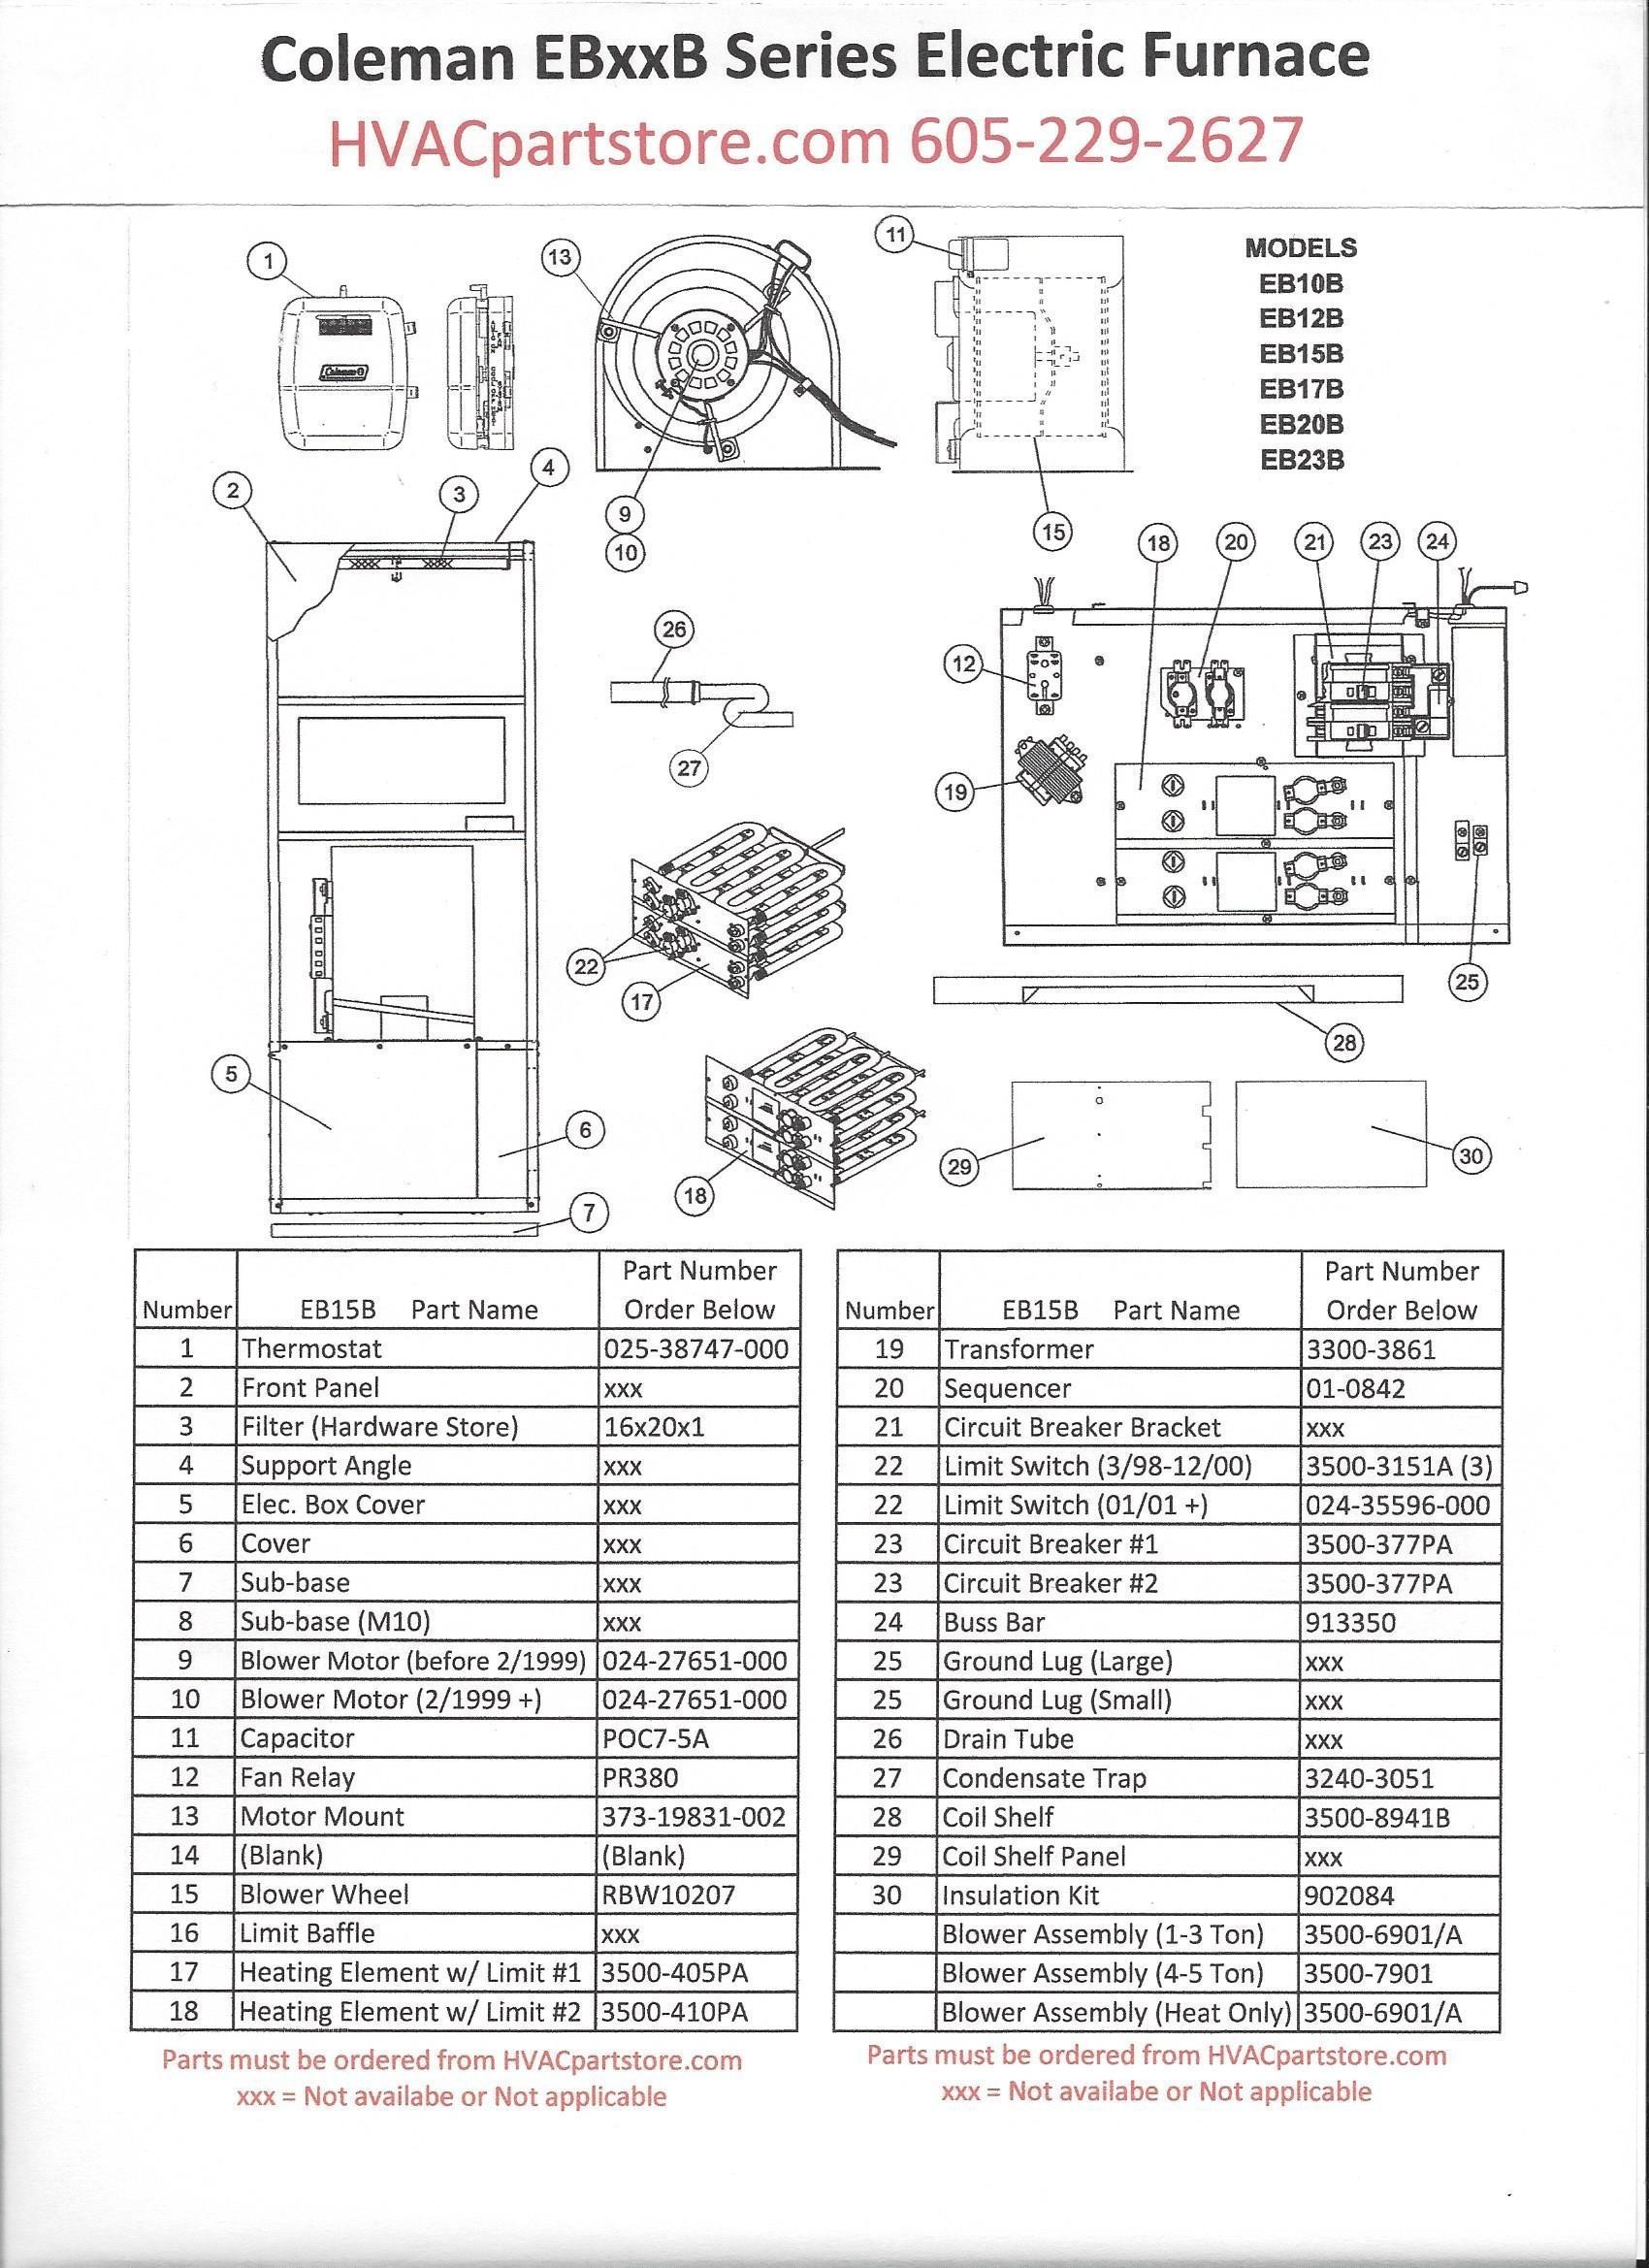 Wiring Diagram for Coleman Mobile Home Furnace New Wiring Diagram A Mobile Home New Wood Electric